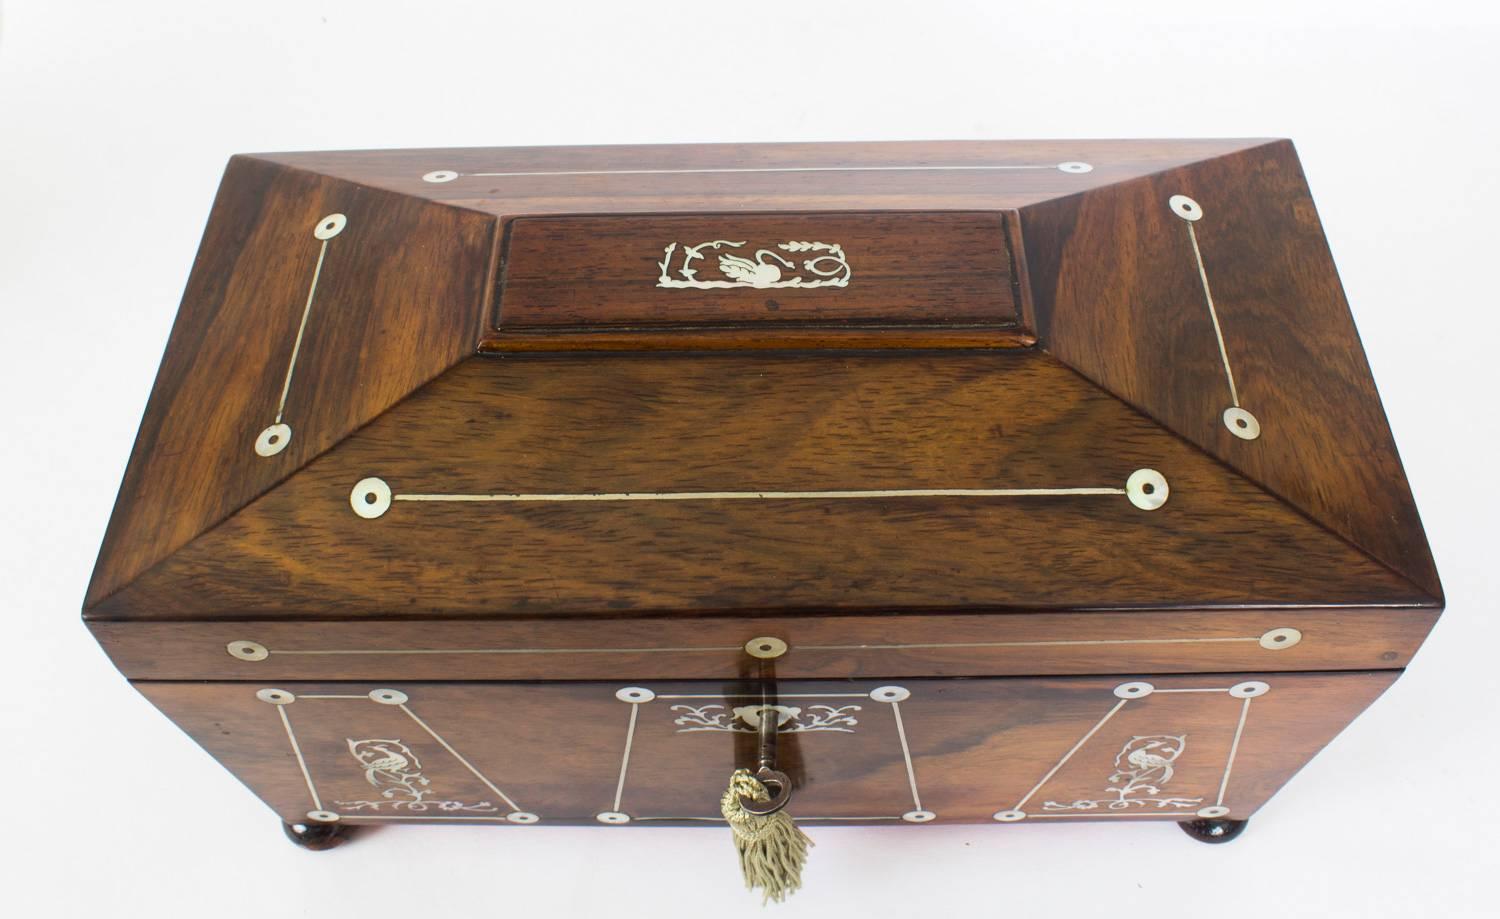 English Antique Regency Rosewood and Mother-of-Pearl Inlaid Casket, 19th Century